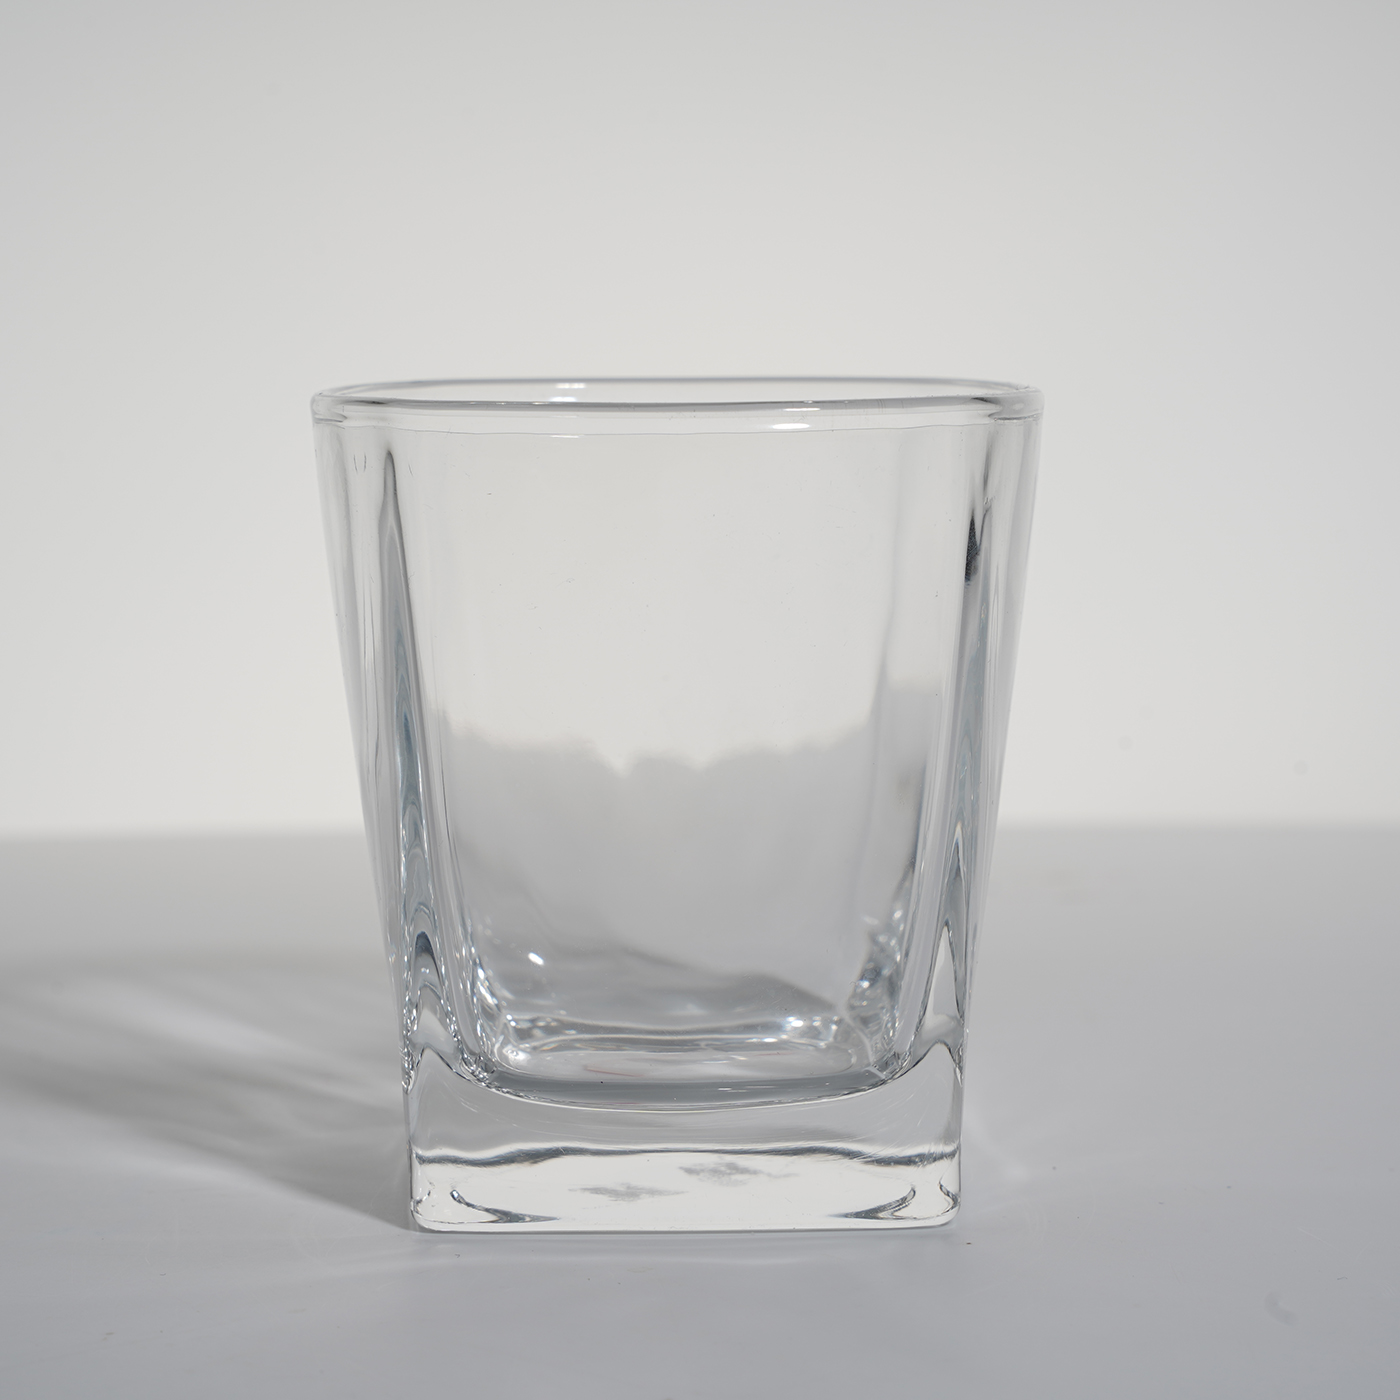 6 oz. Promotional Square Whiskey Glass4